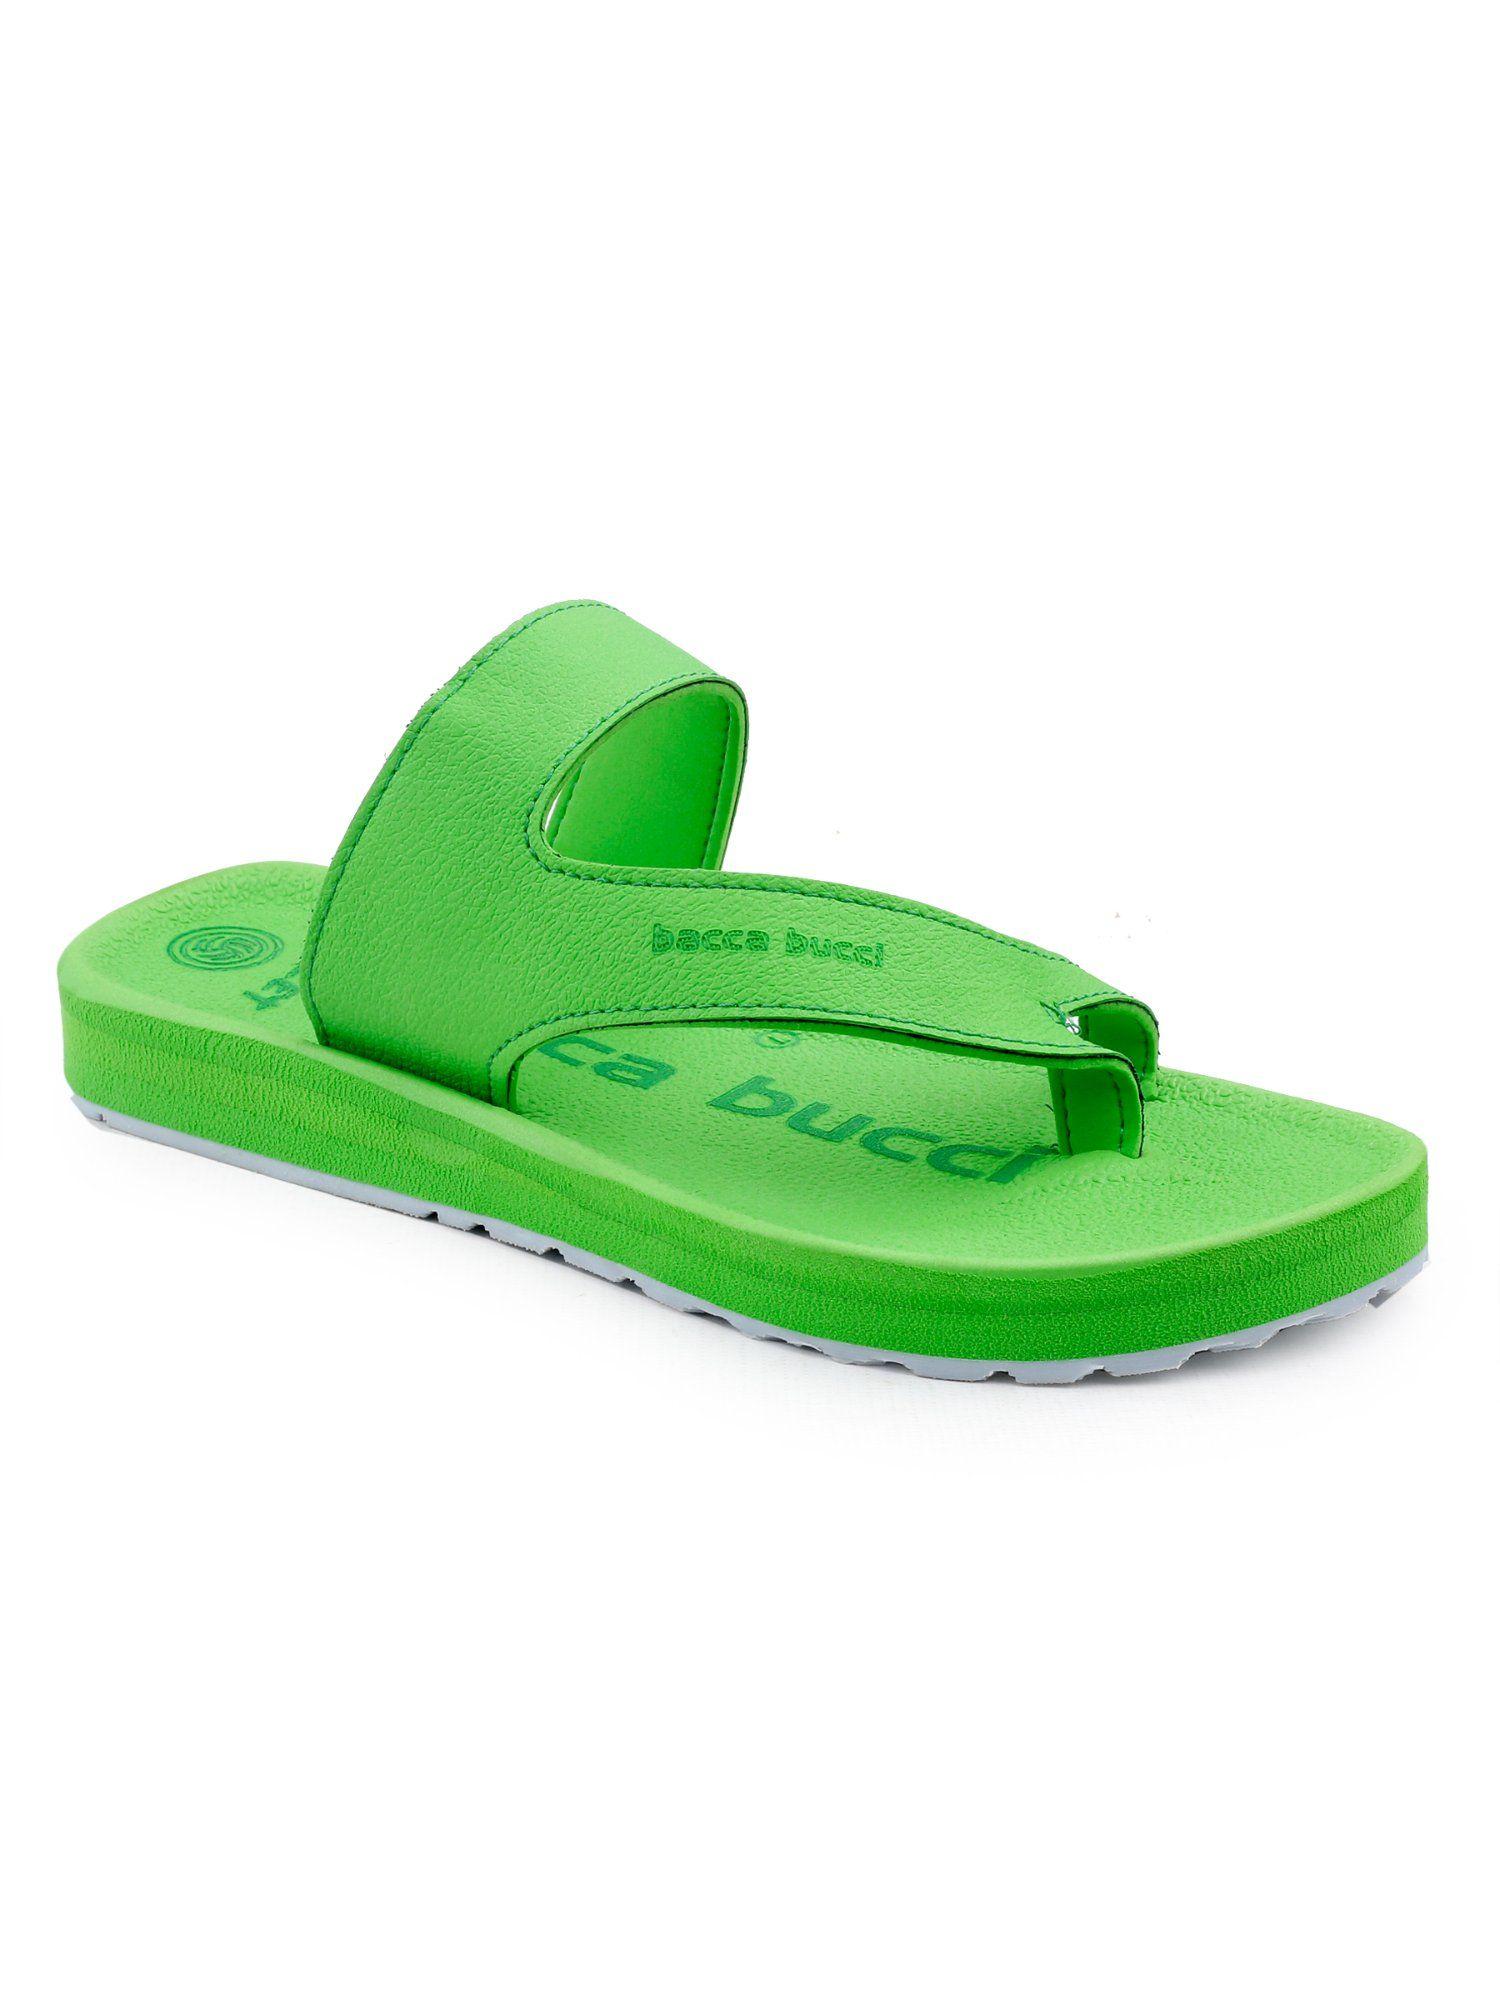 beach-club cloud flipflops with non-slip rubber outsole-green